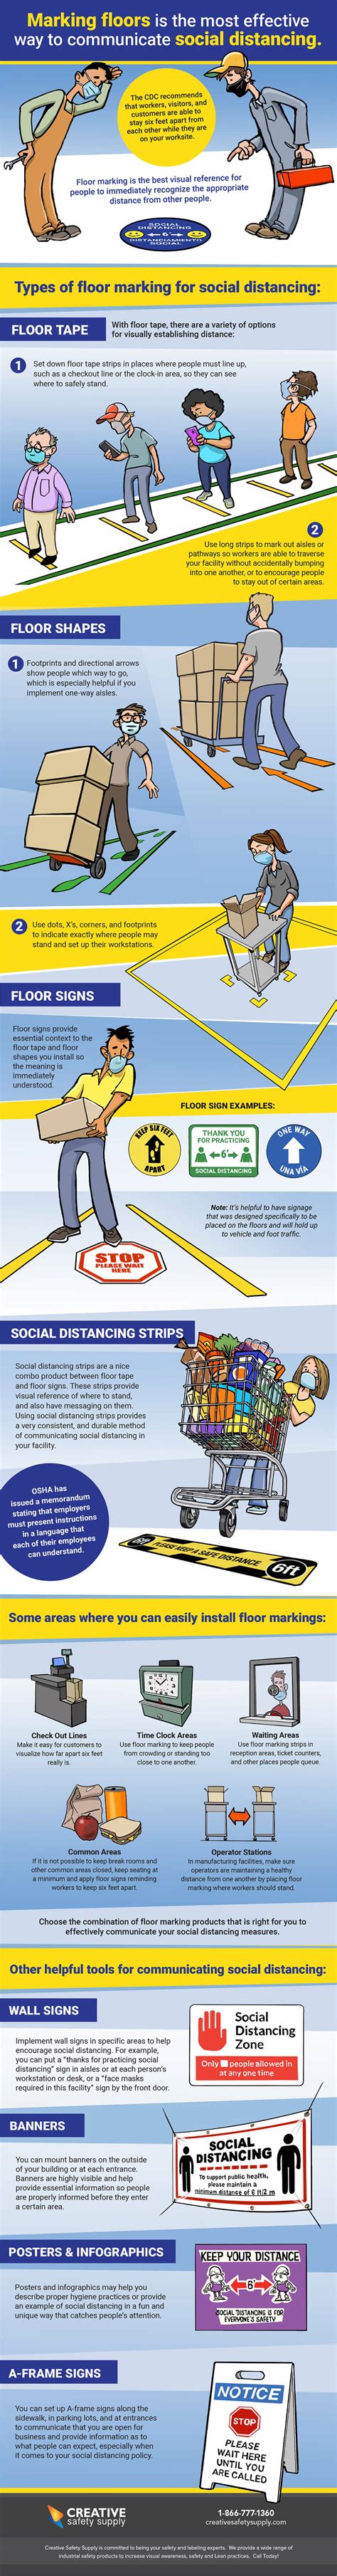 Infographic Marking Floors To Communicate Social Distancing Creative